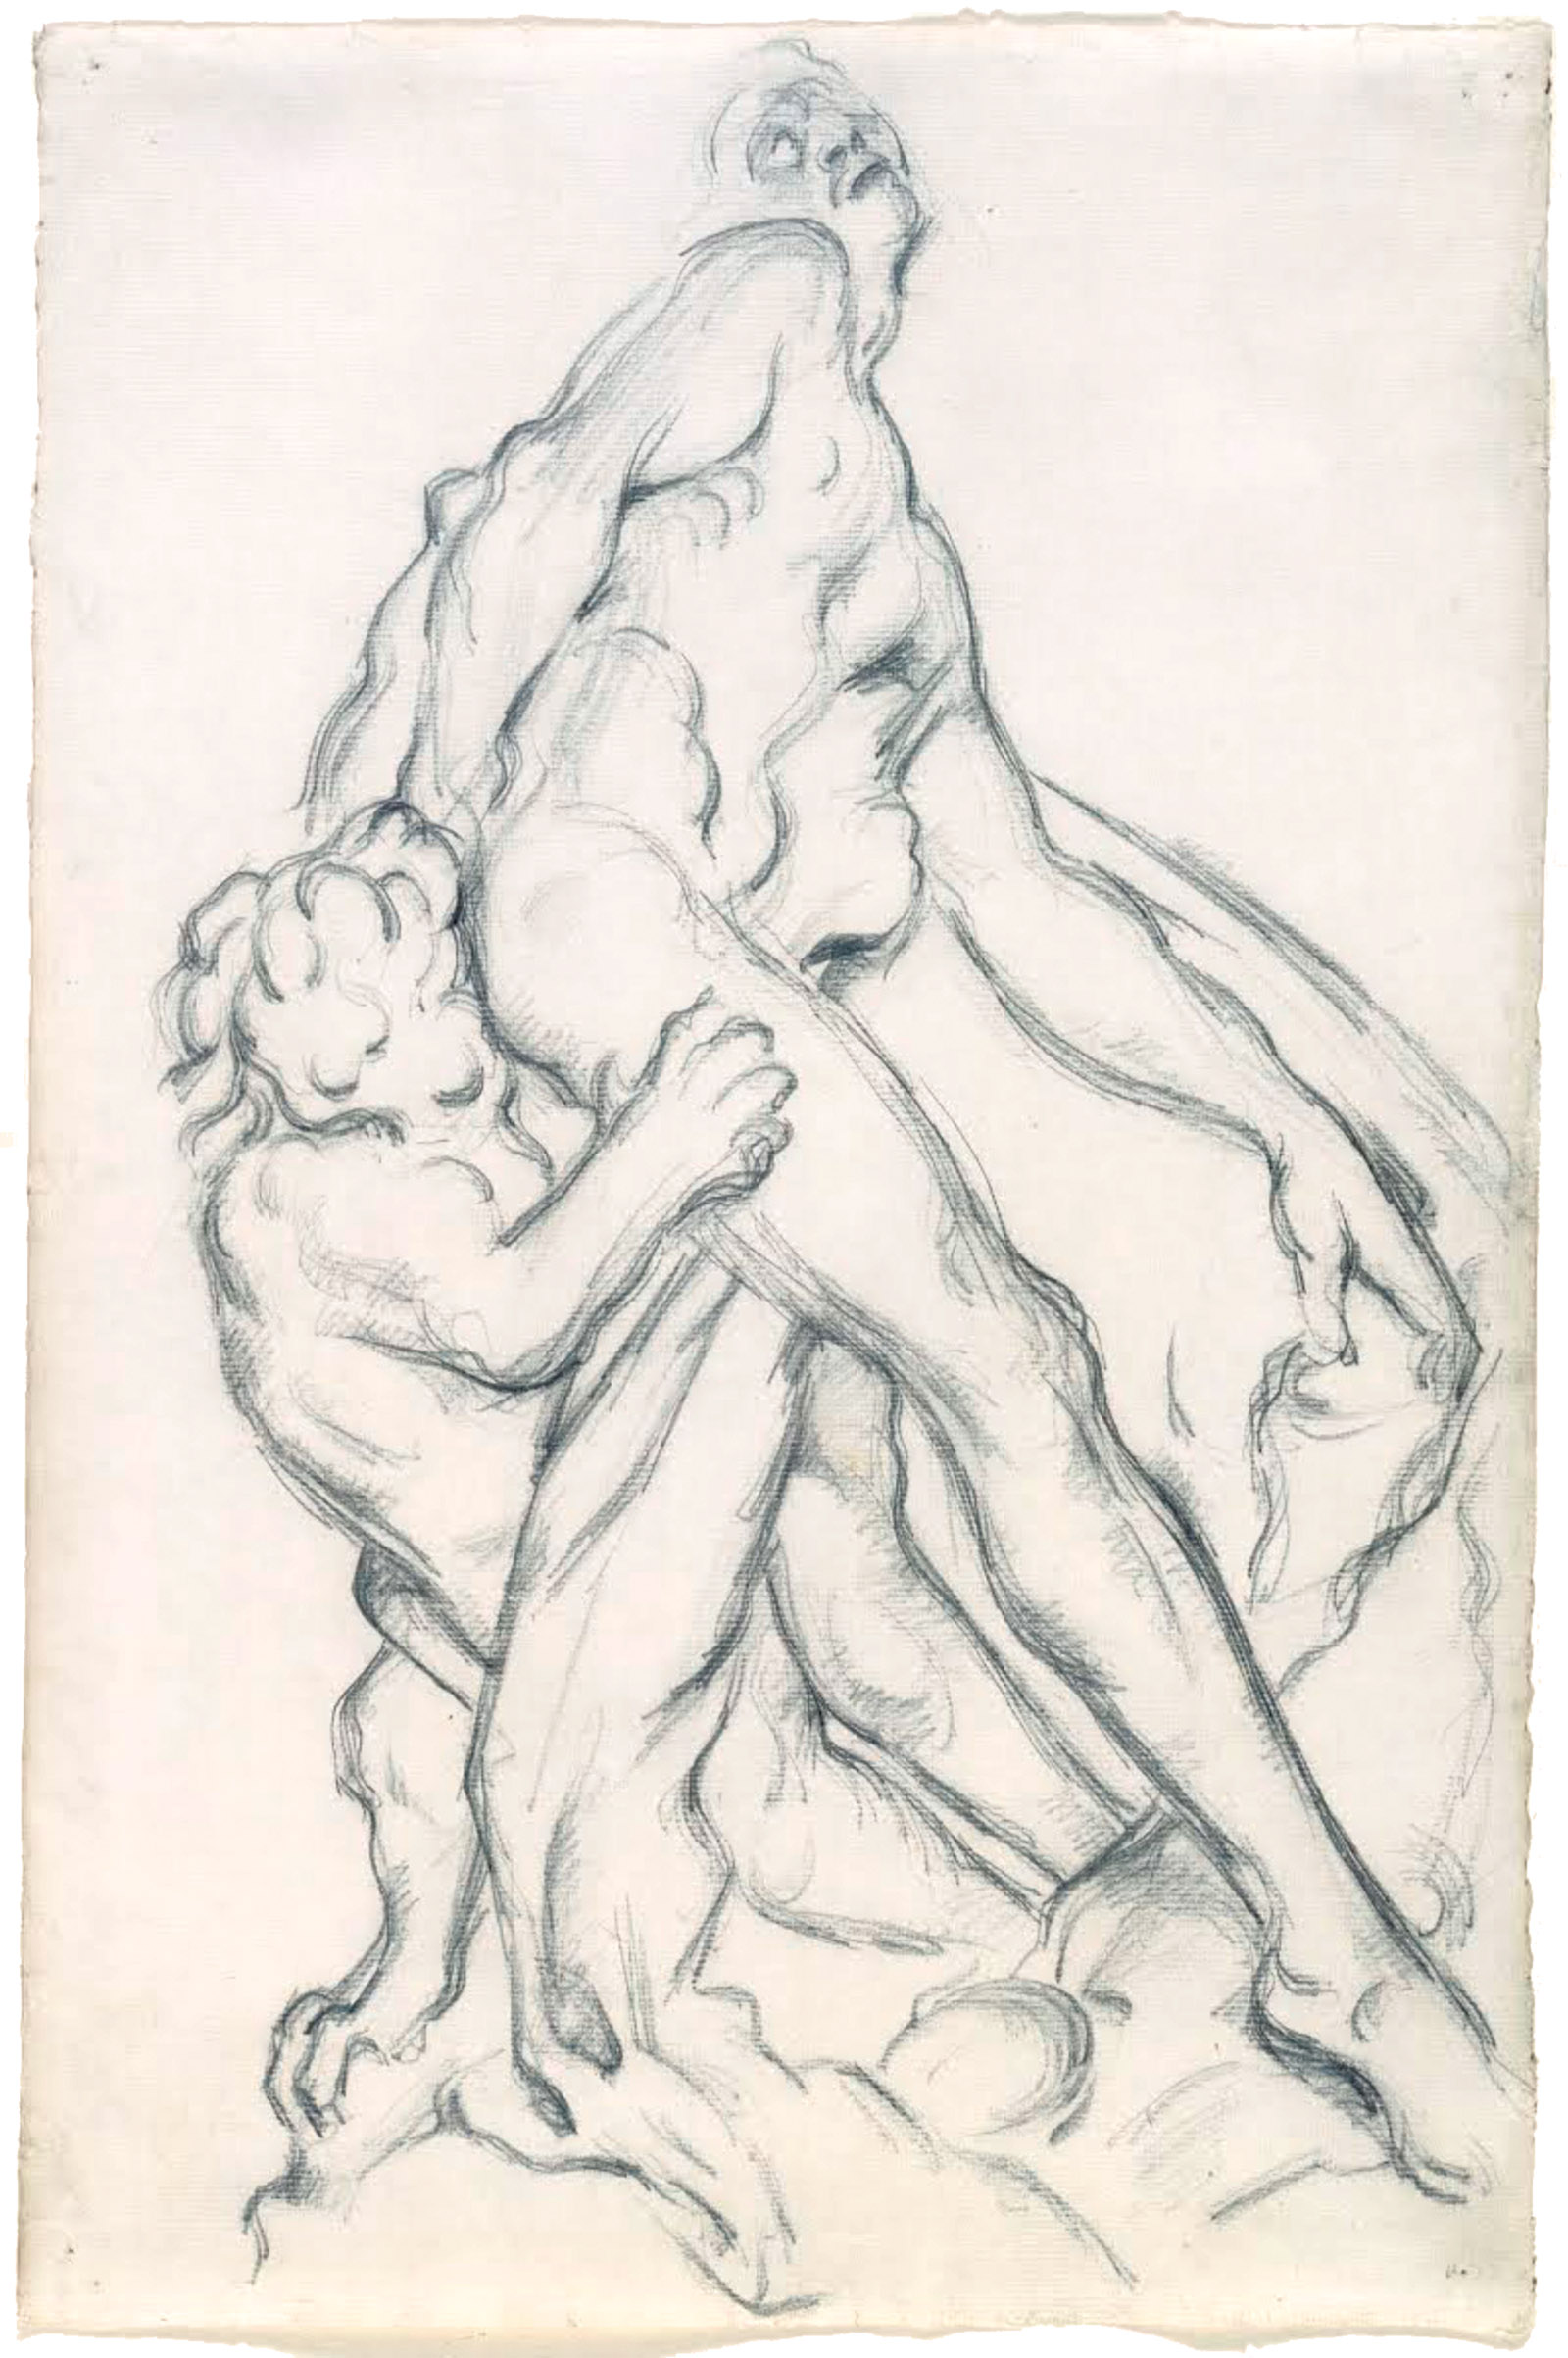 After Puget: Milo of Crotona; drawing by Paul Cézanne